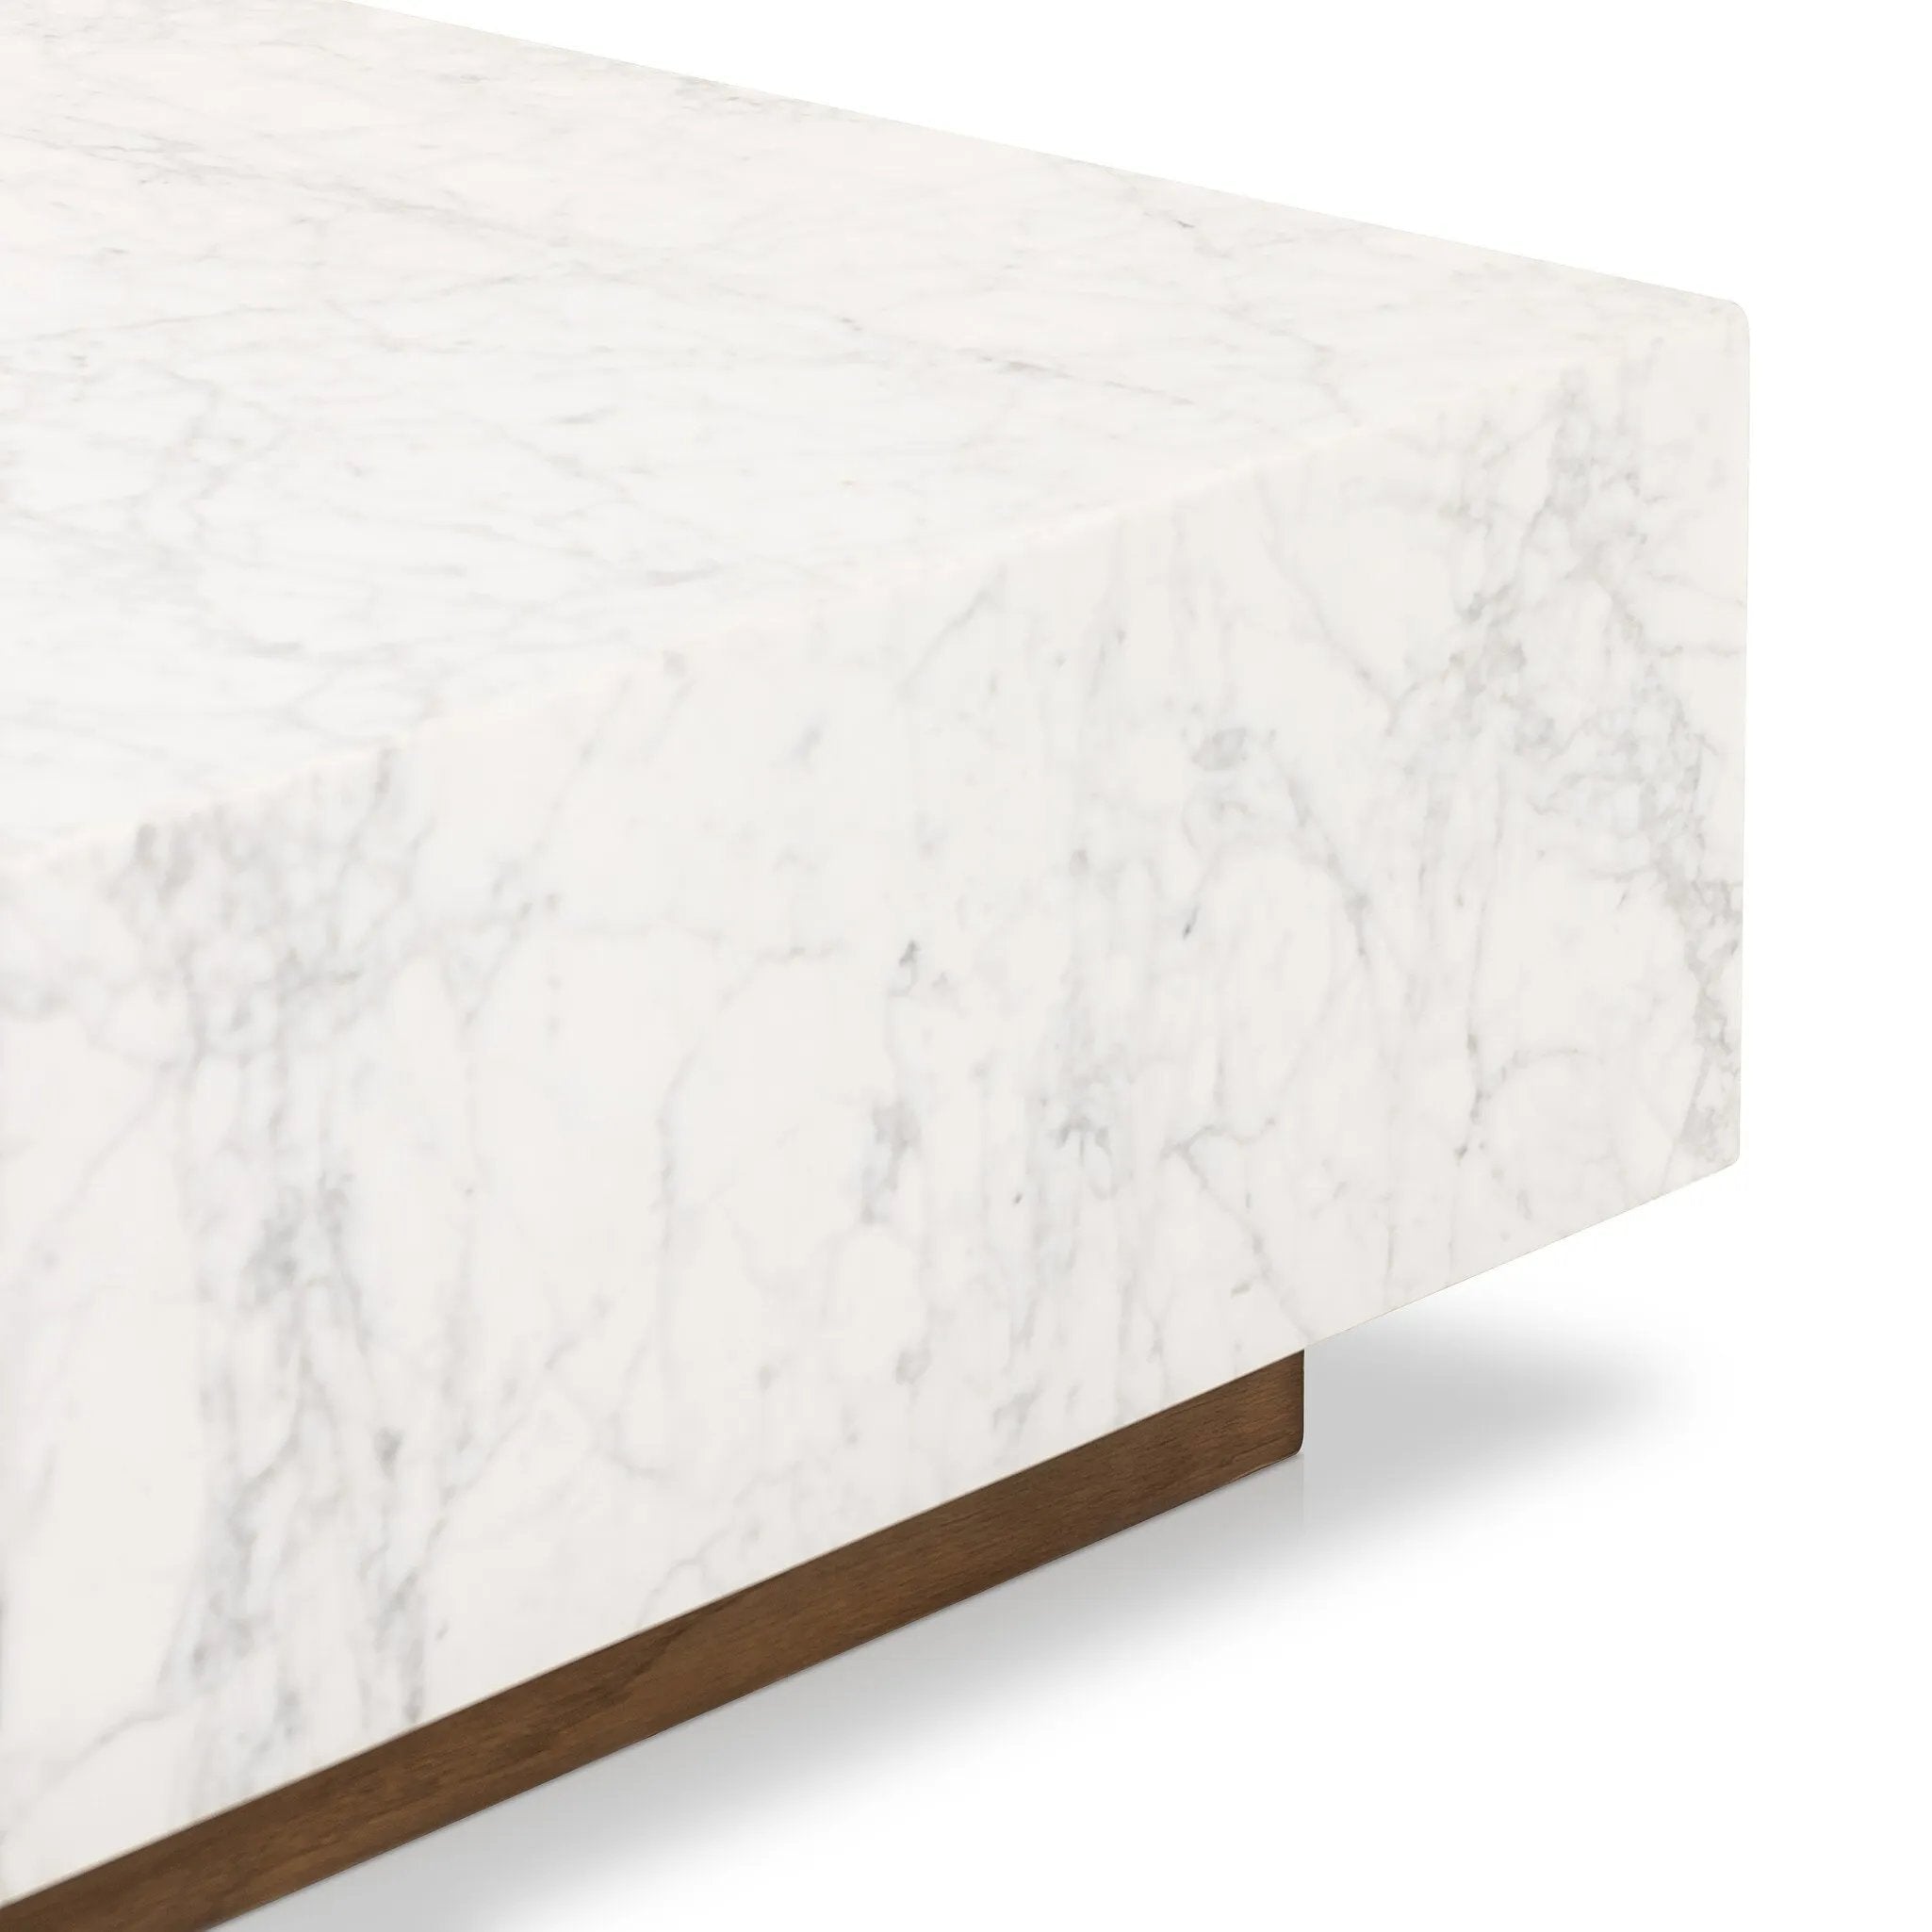 A white Carrara marble slab, rich with veining and movement. Supported by a wooden plinth, marble takes the spotlight in a design that's simple and sophisticated at once.Collection: Hughe Amethyst Home provides interior design, new home construction design consulting, vintage area rugs, and lighting in the Tampa metro area.